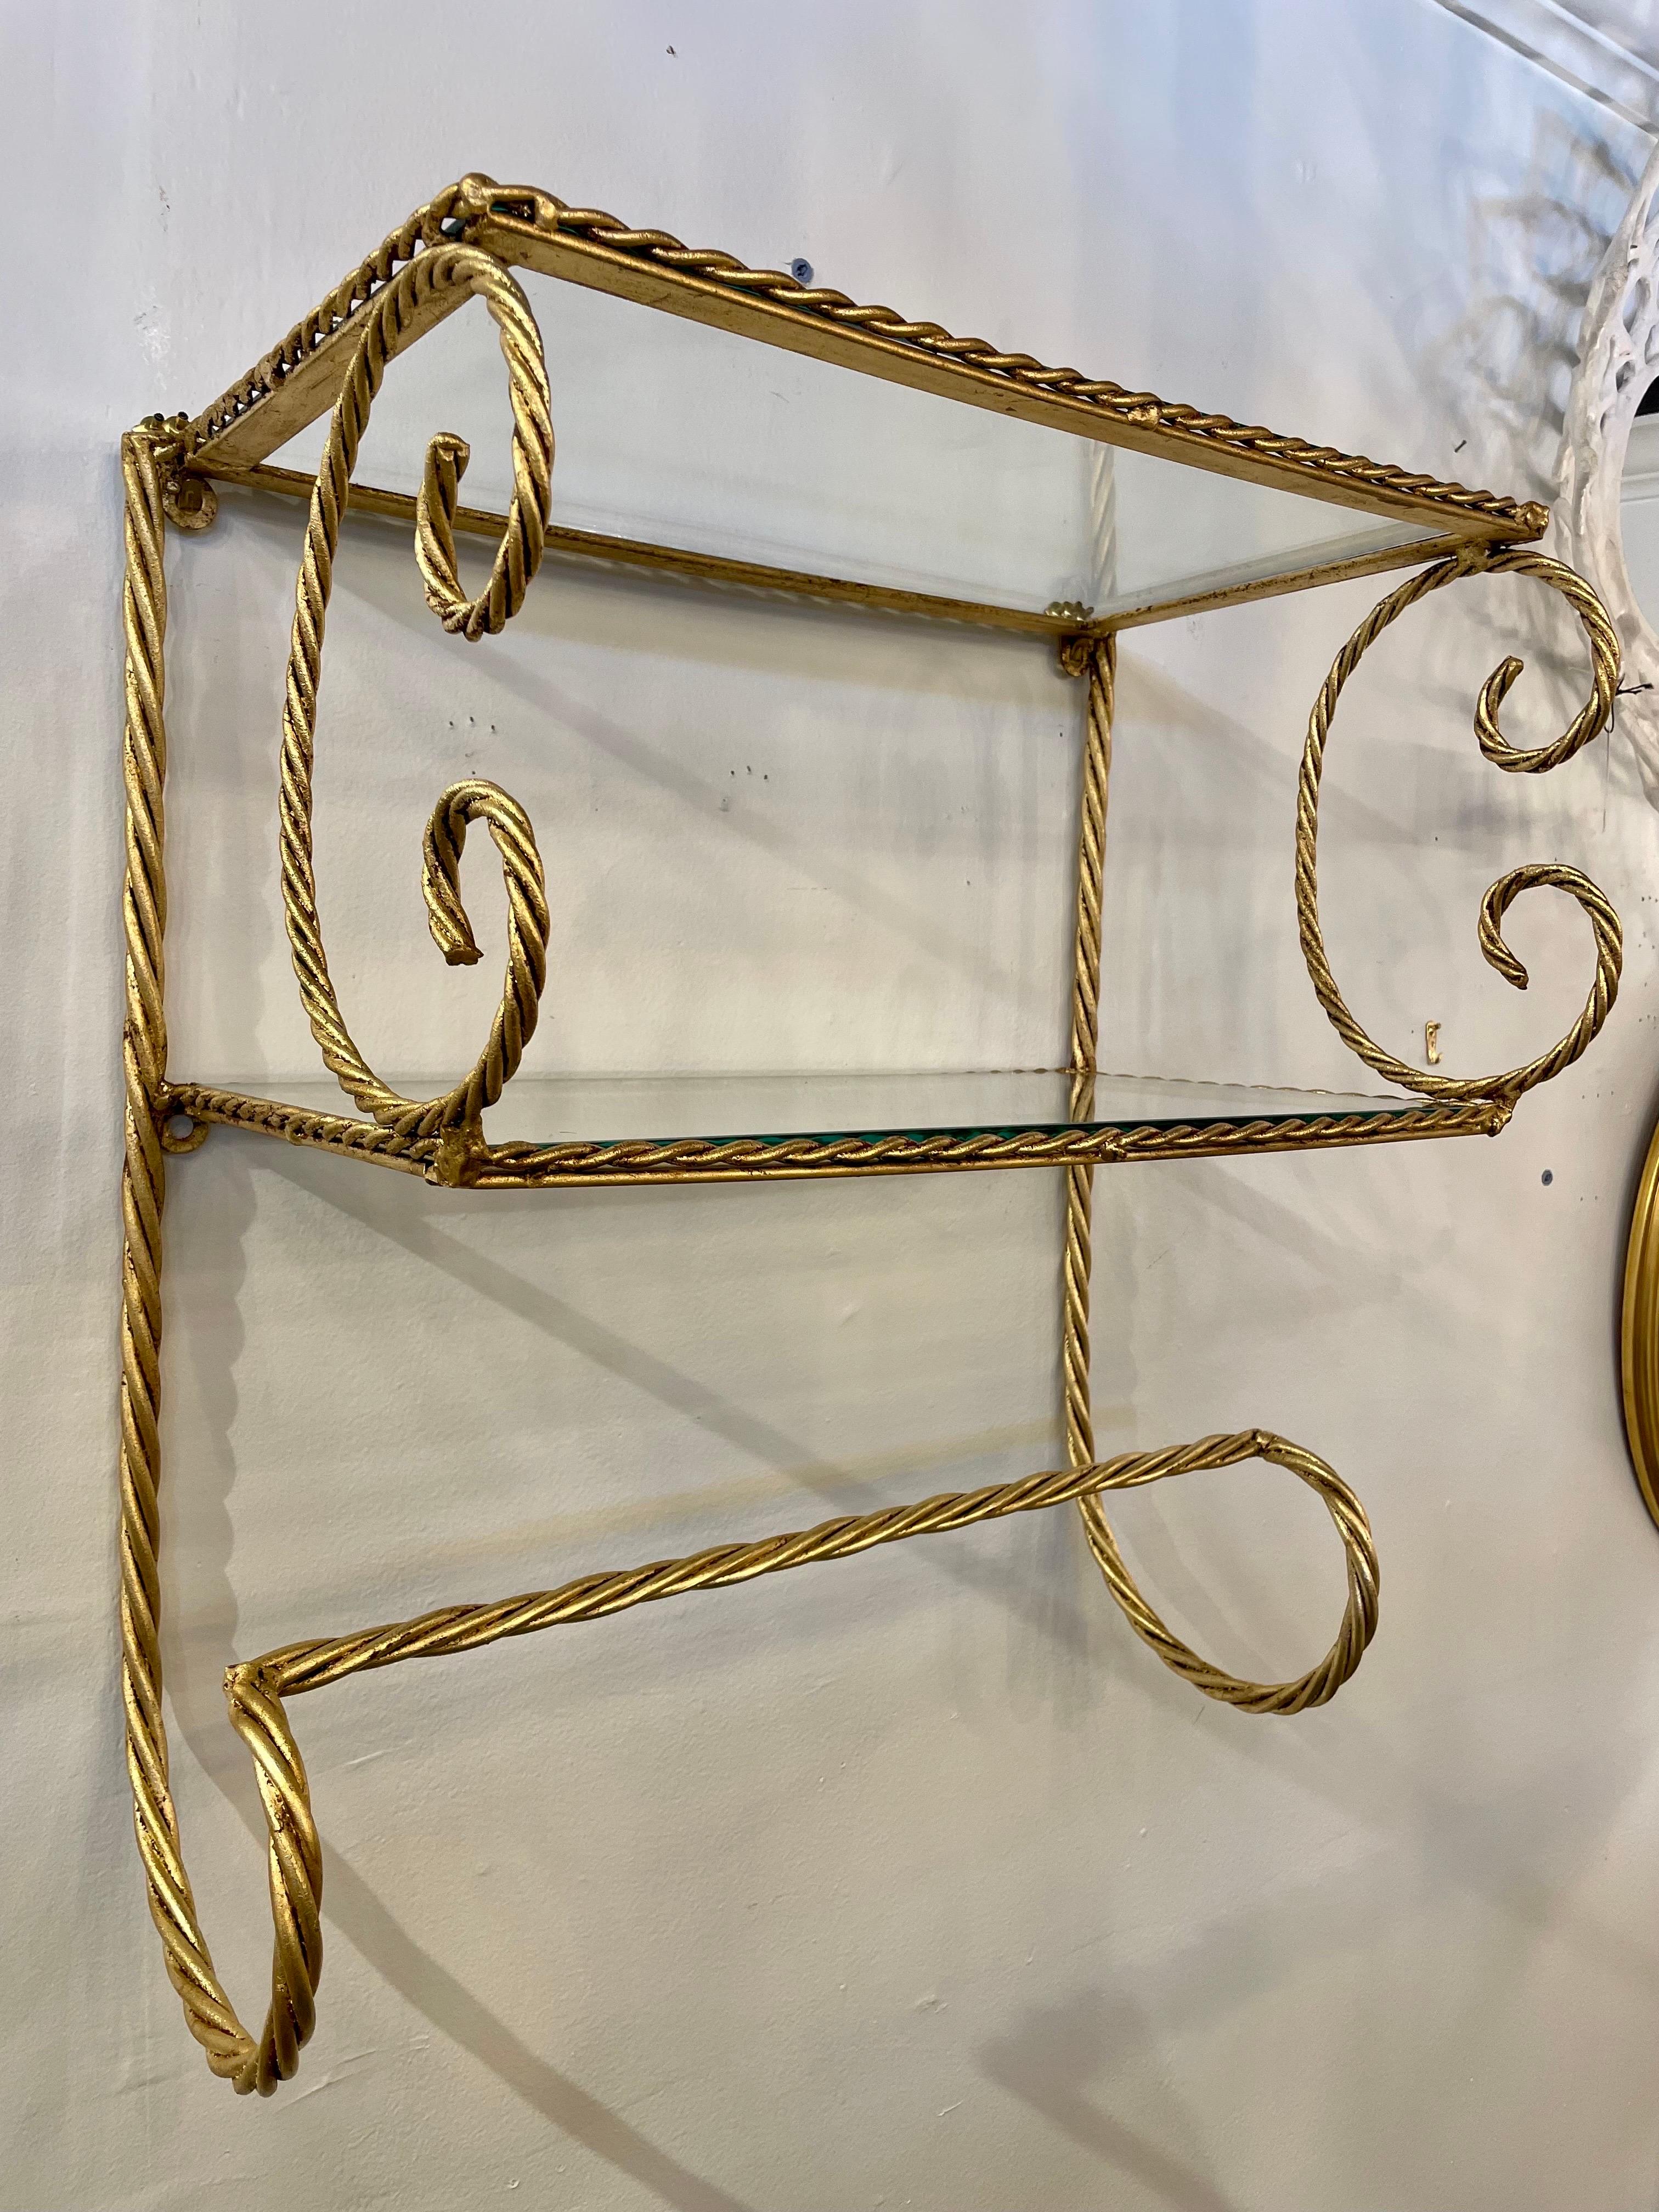 Italian Gilt Rope Two-Tier Wall Shelf Towel Bar with new glass shelves. Scrolled sides. Perfect for bathroom, has towel bar below shelves. Very sturdy and stylish